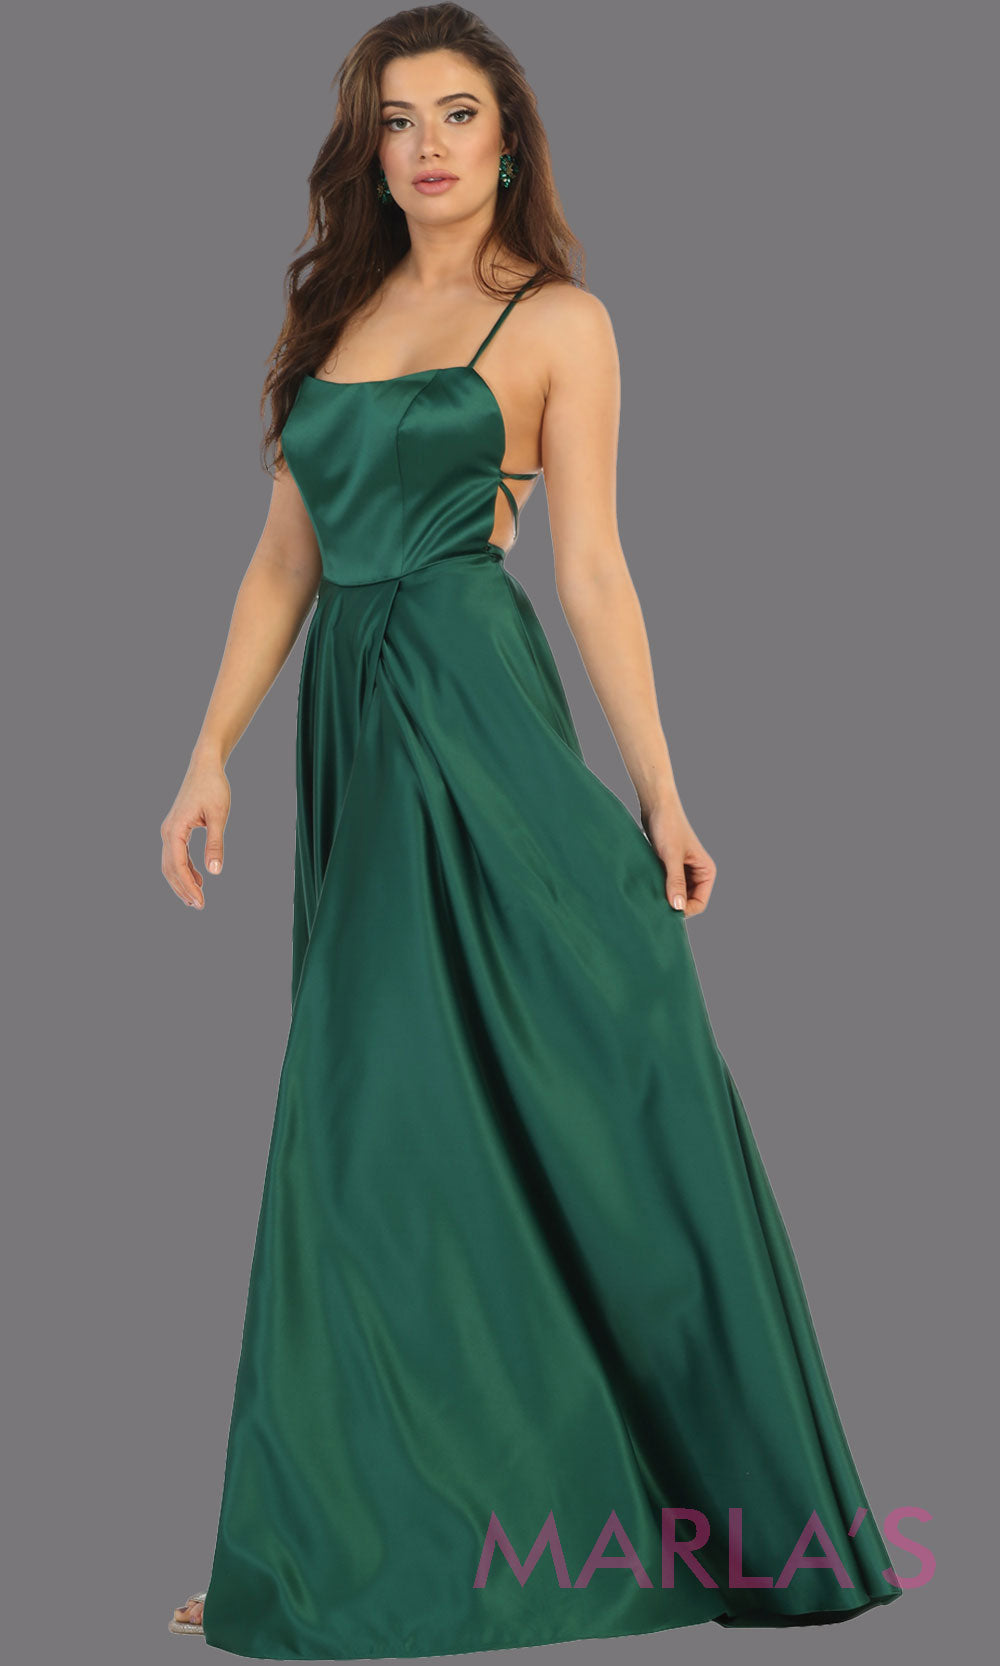 Long hunter green satin corset back dress with high slit from MayQueen RQ7711.This dark  green prom evening gown is perfect for wedding guest dress,formal party dress,plus size dresses, engagement party,eshoot, engagement shoot,gala